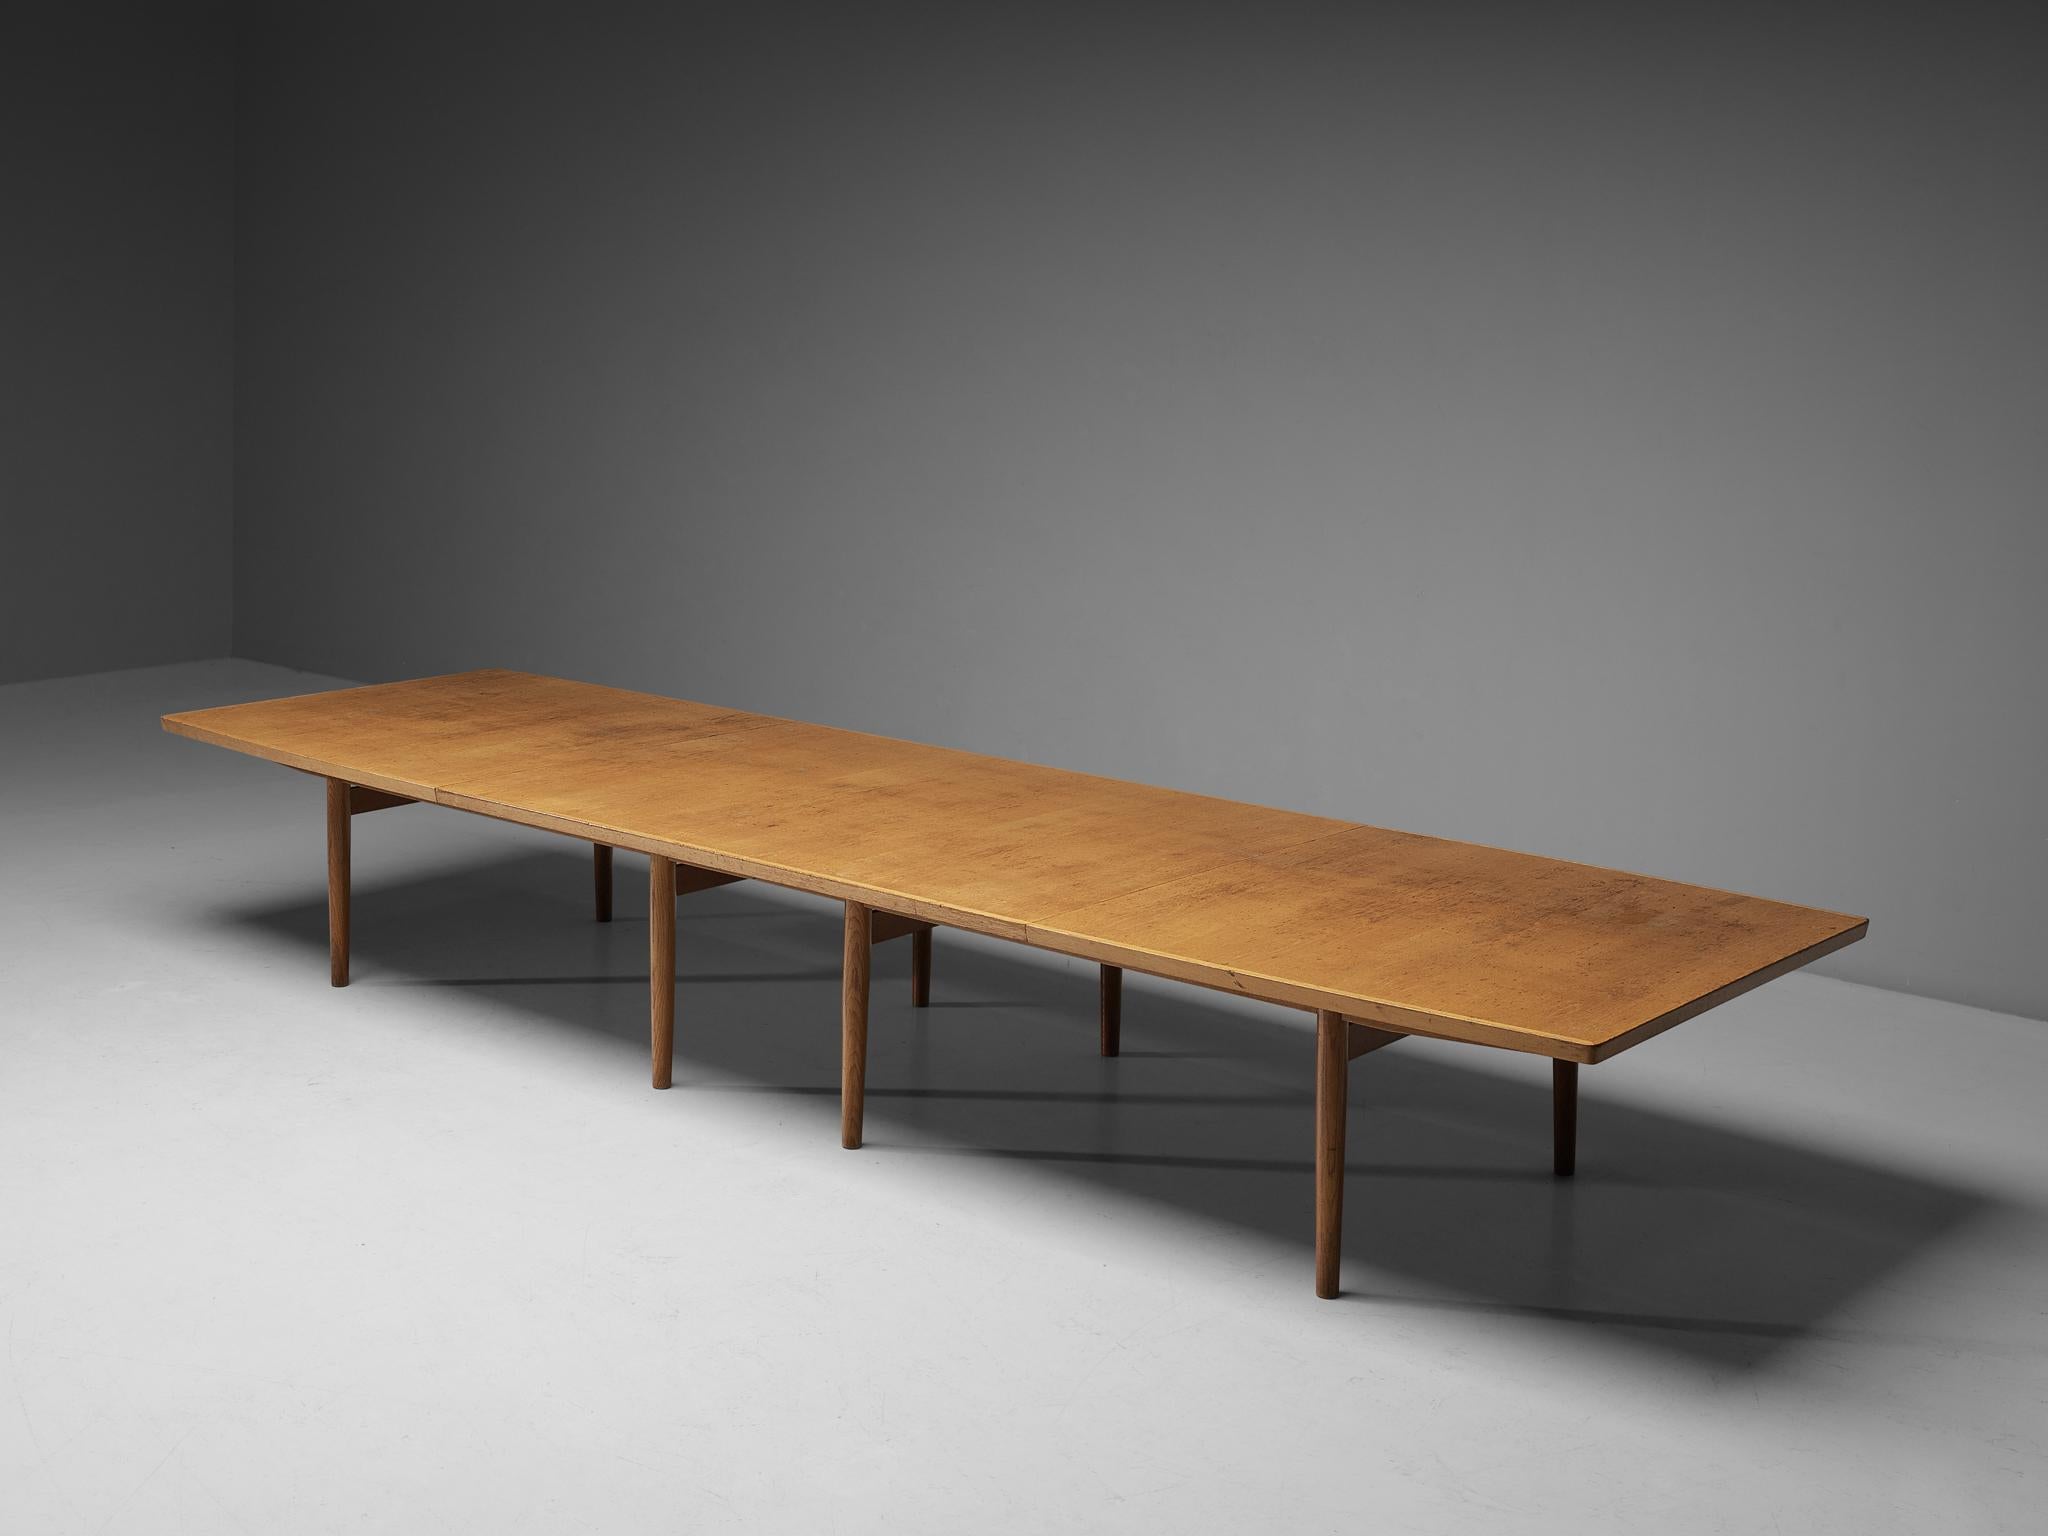 Arne Vodder for Sibast, conference table, oak, Denmark, 1960s, 16 ft. 

This large conference table consists of a boat shaped top supported by eight circular legs executed in a subtle and modest way. The table has an open look and is structurally